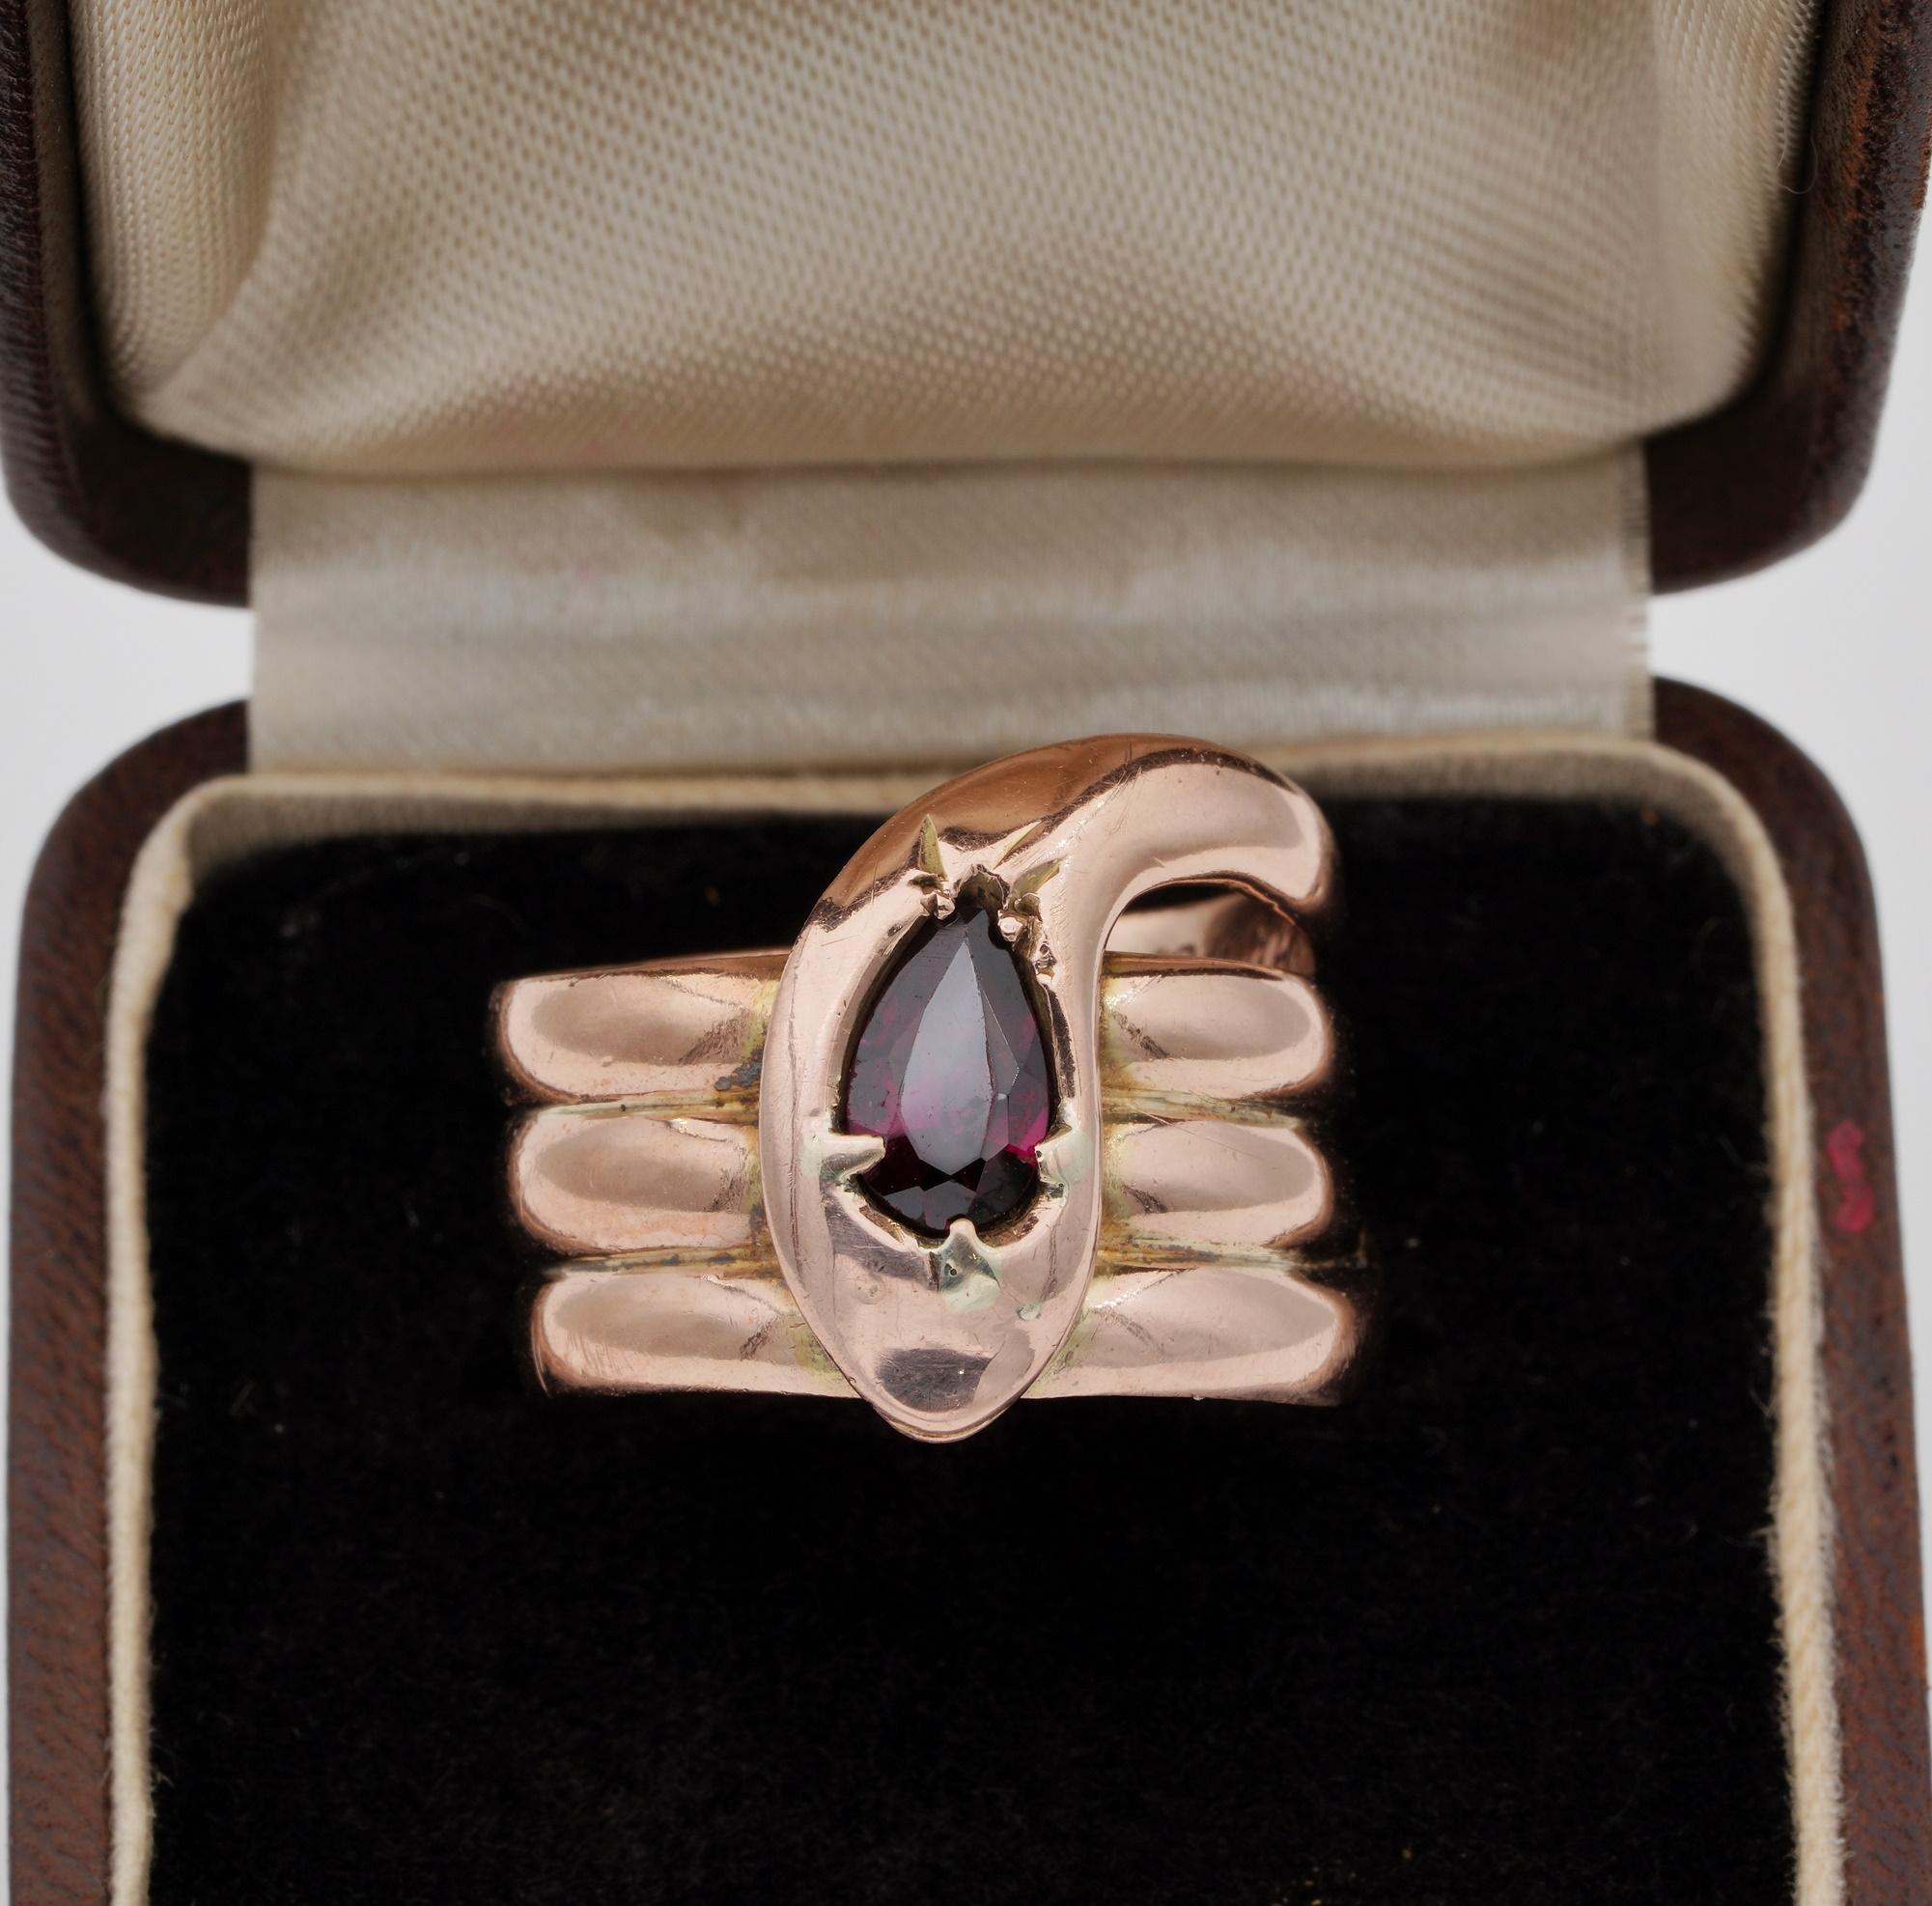 Remarkable sized huge triple coiled traditional Victorian solid 9 Ct rose gold ring in the shape of a stunning Snake. With an intense vibrant Red Pirope Garnet of 1.30 Ct giving remark to the snake head beautifully laid upon the coiling.
A classy